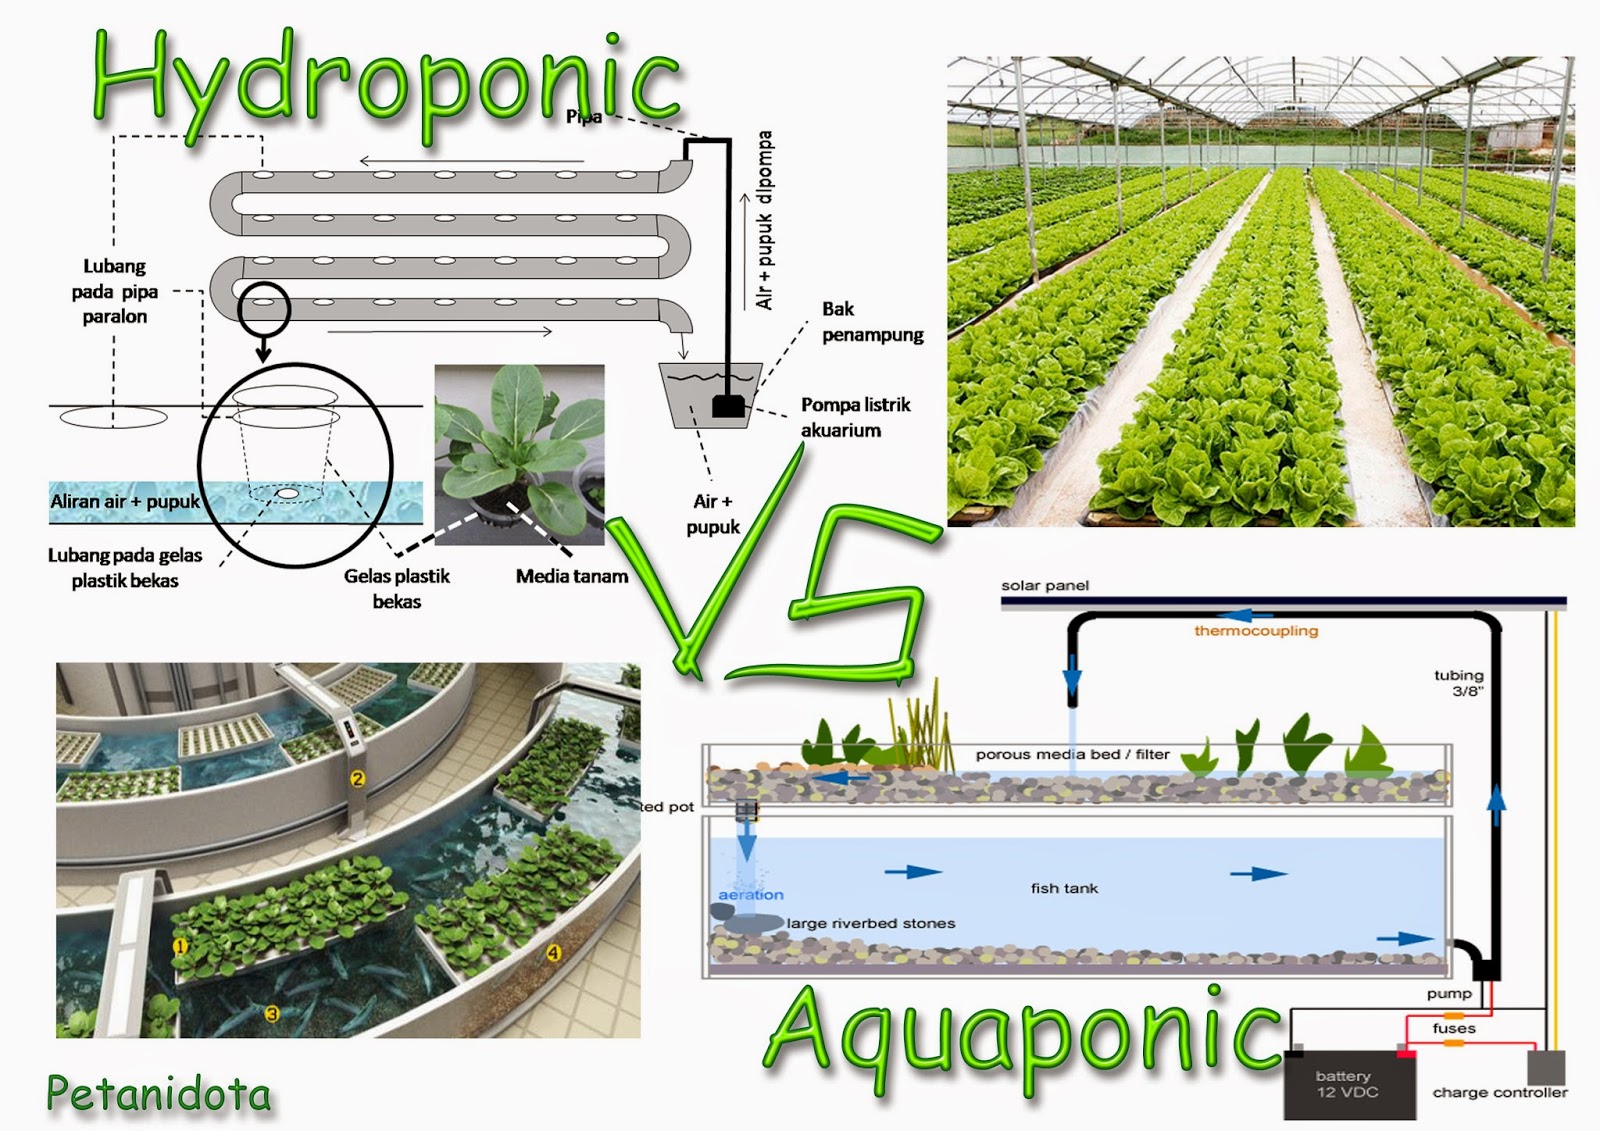 Hydroponic Vs Aquaponic Which is The Best one? | -Petani TOP-